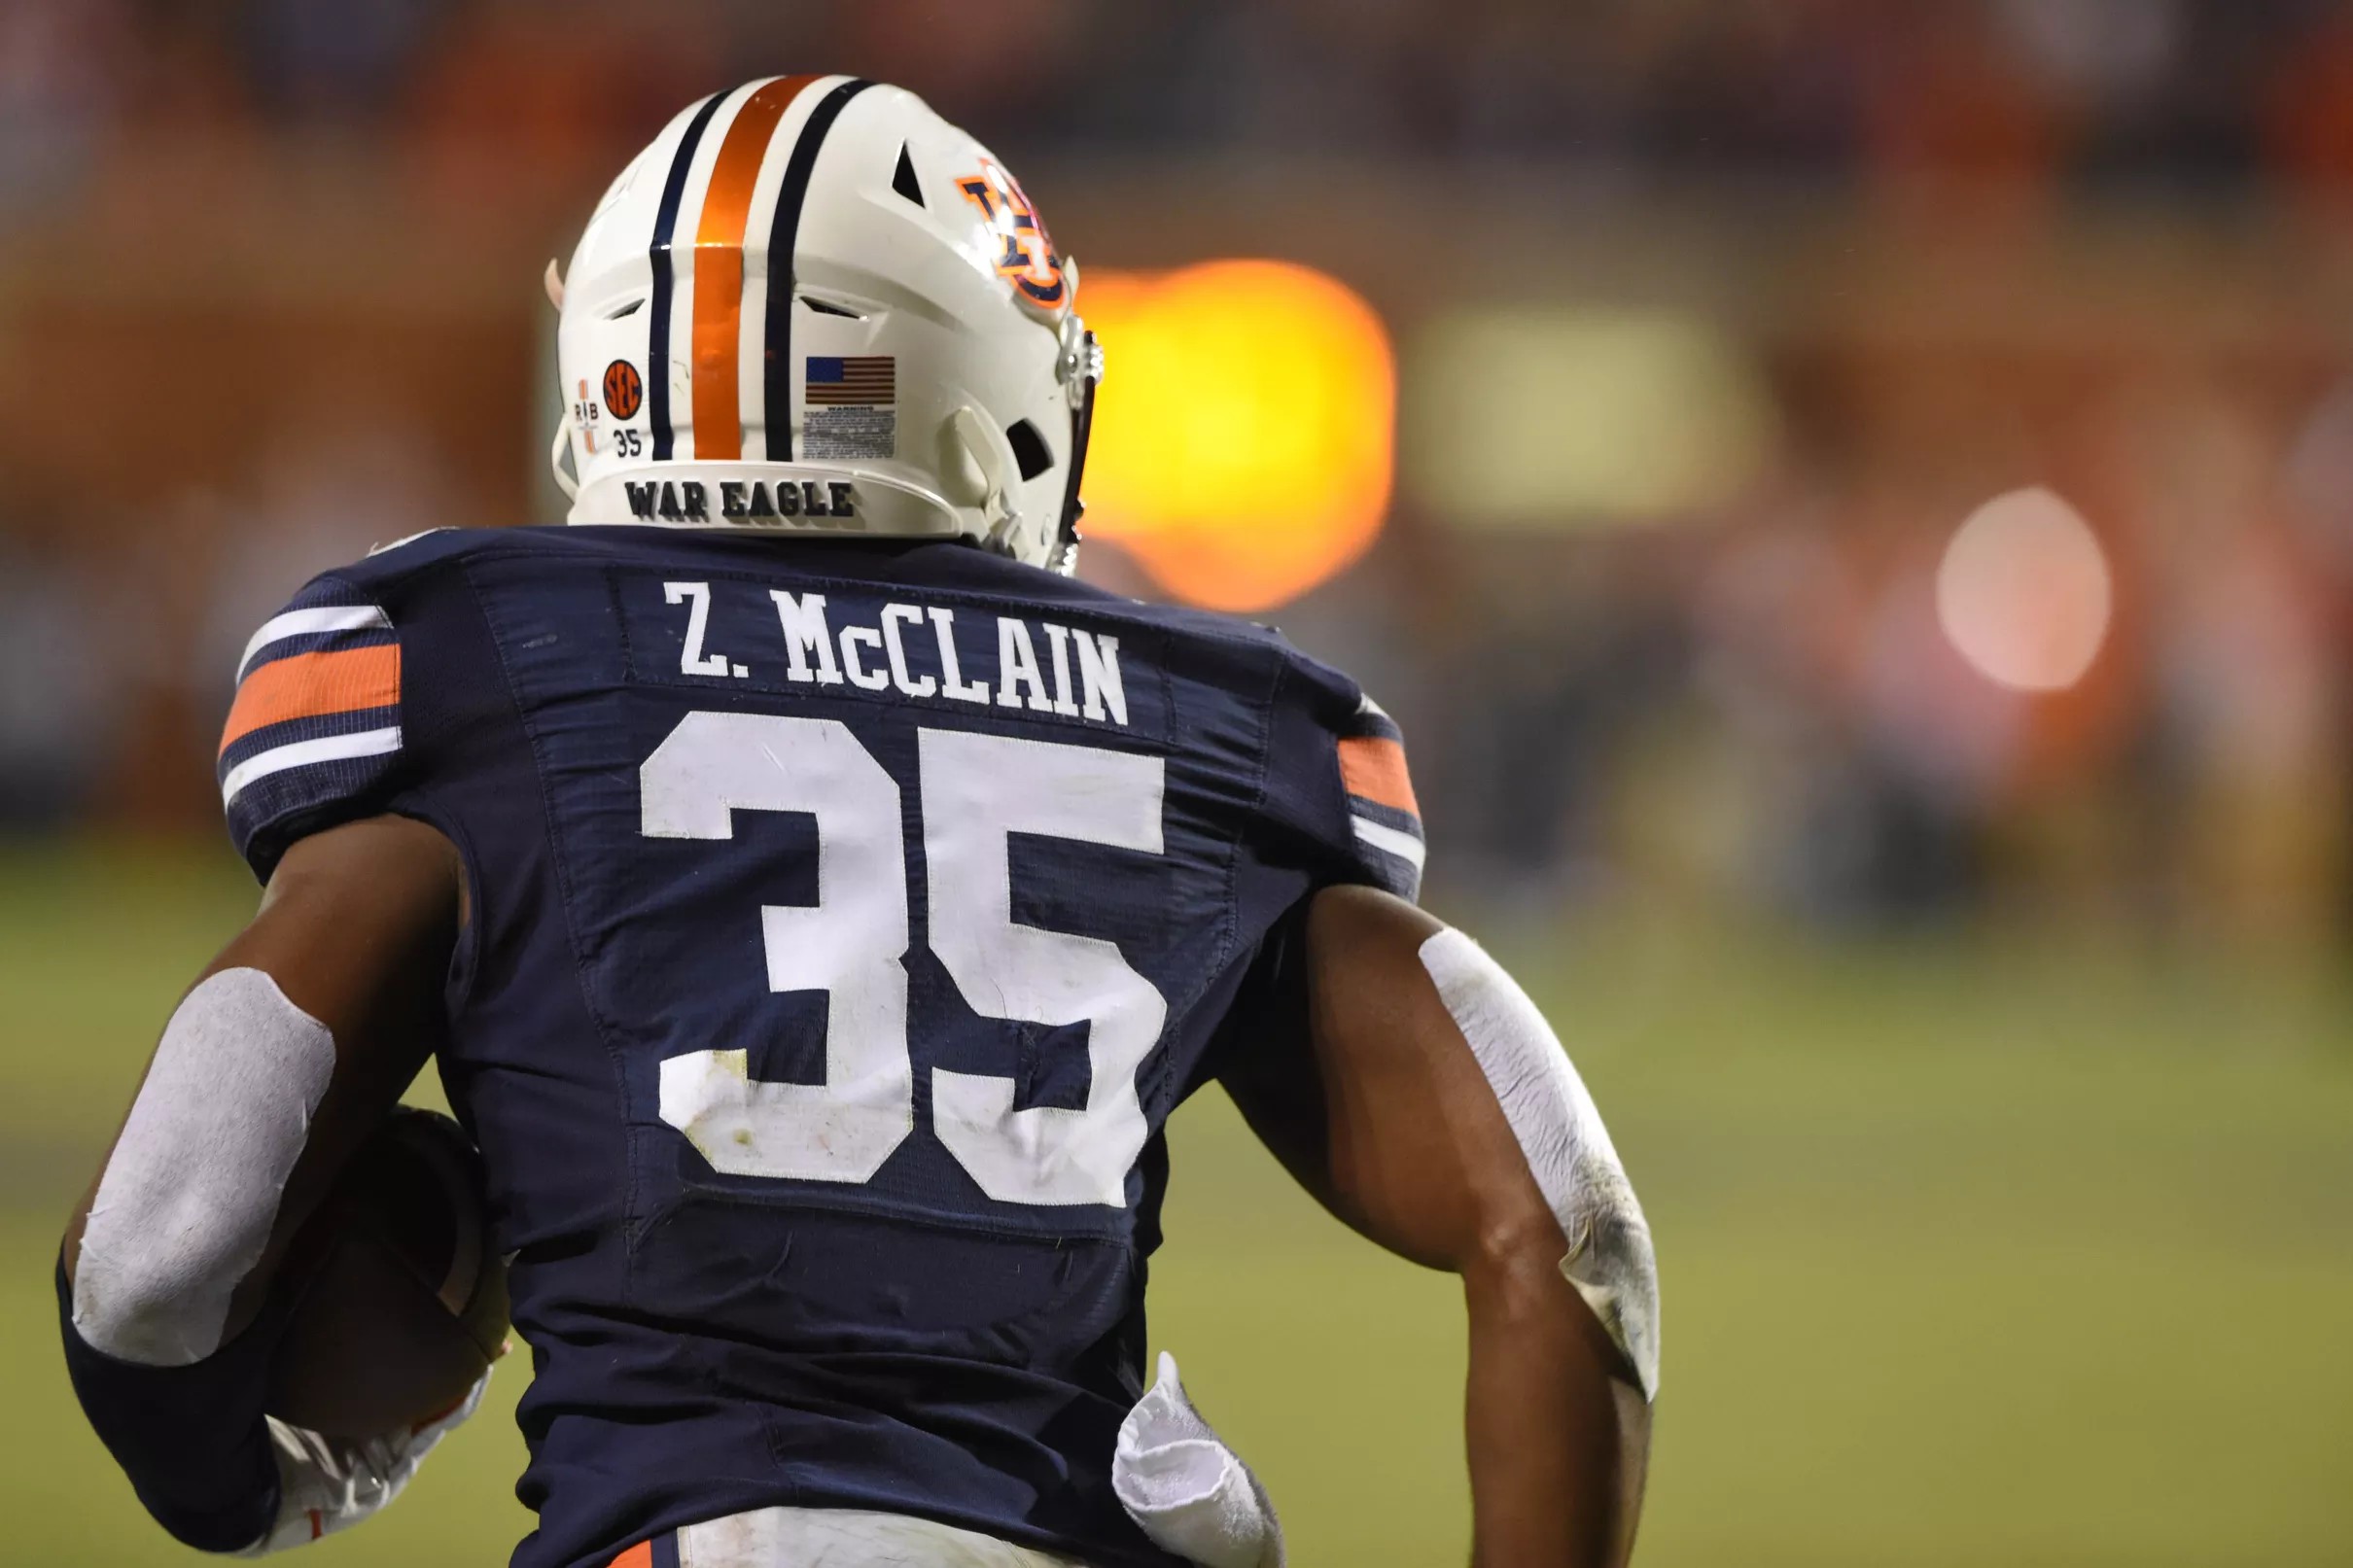 Initial Impressions from the Auburn game